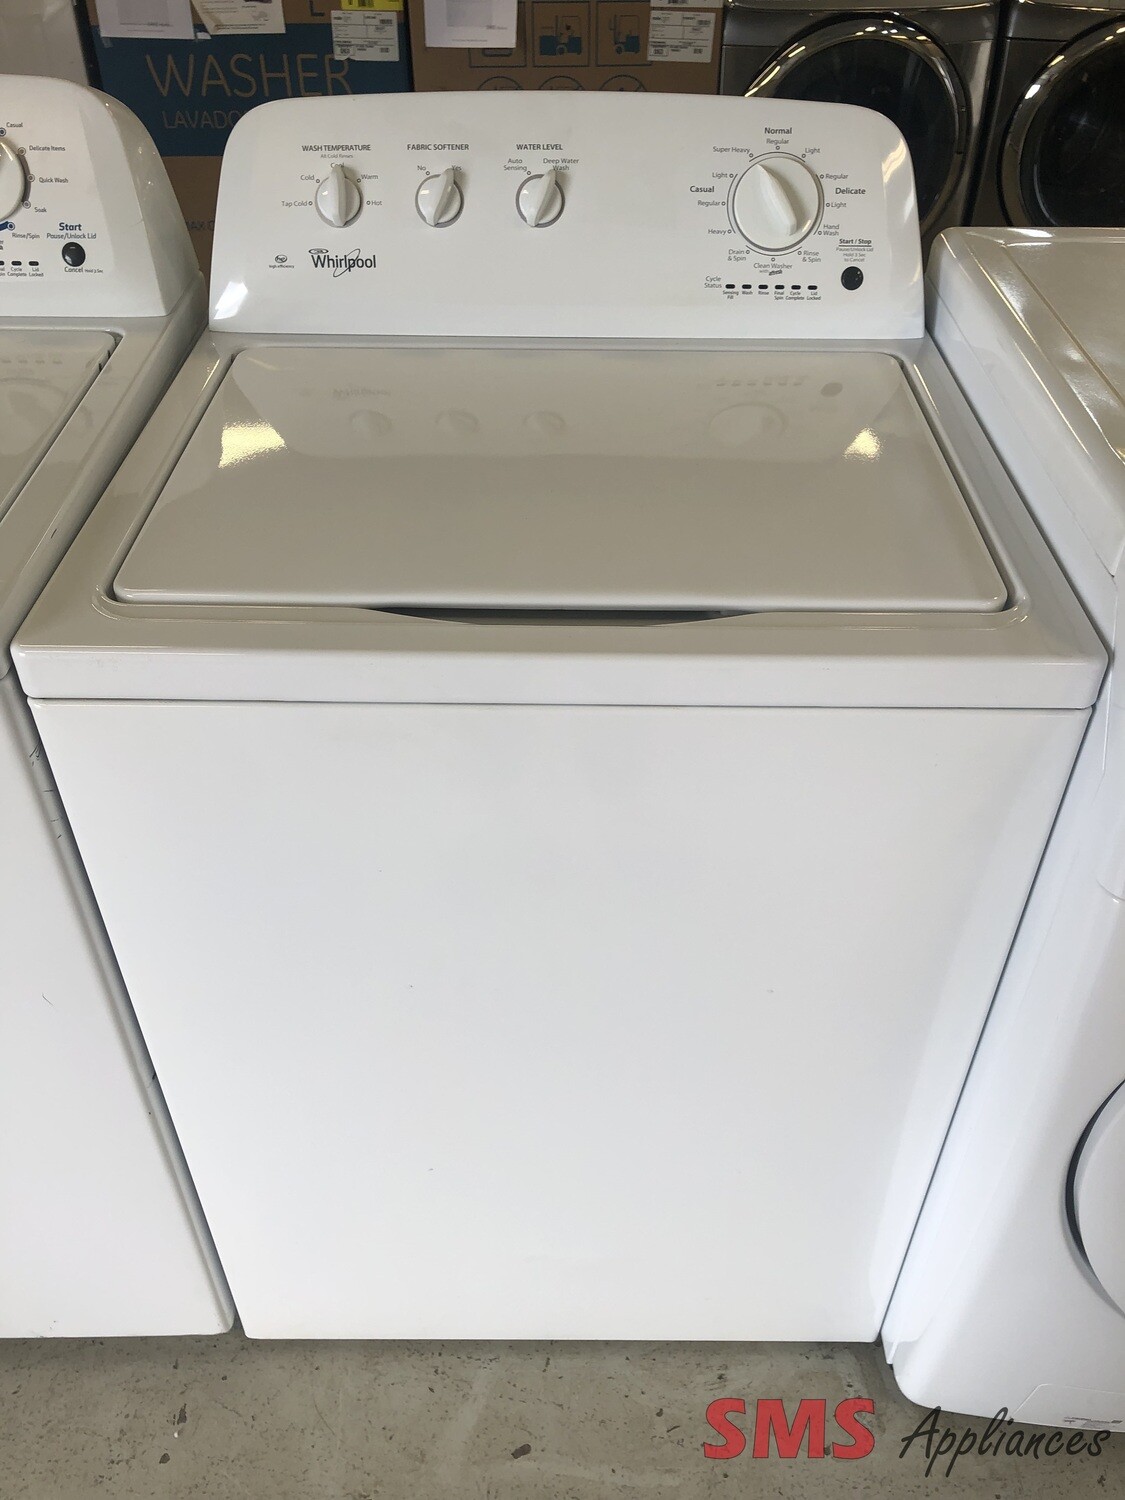 Whirlpool 27" Top Load Washer 4.0 Cu. Ft. WTW4616FW